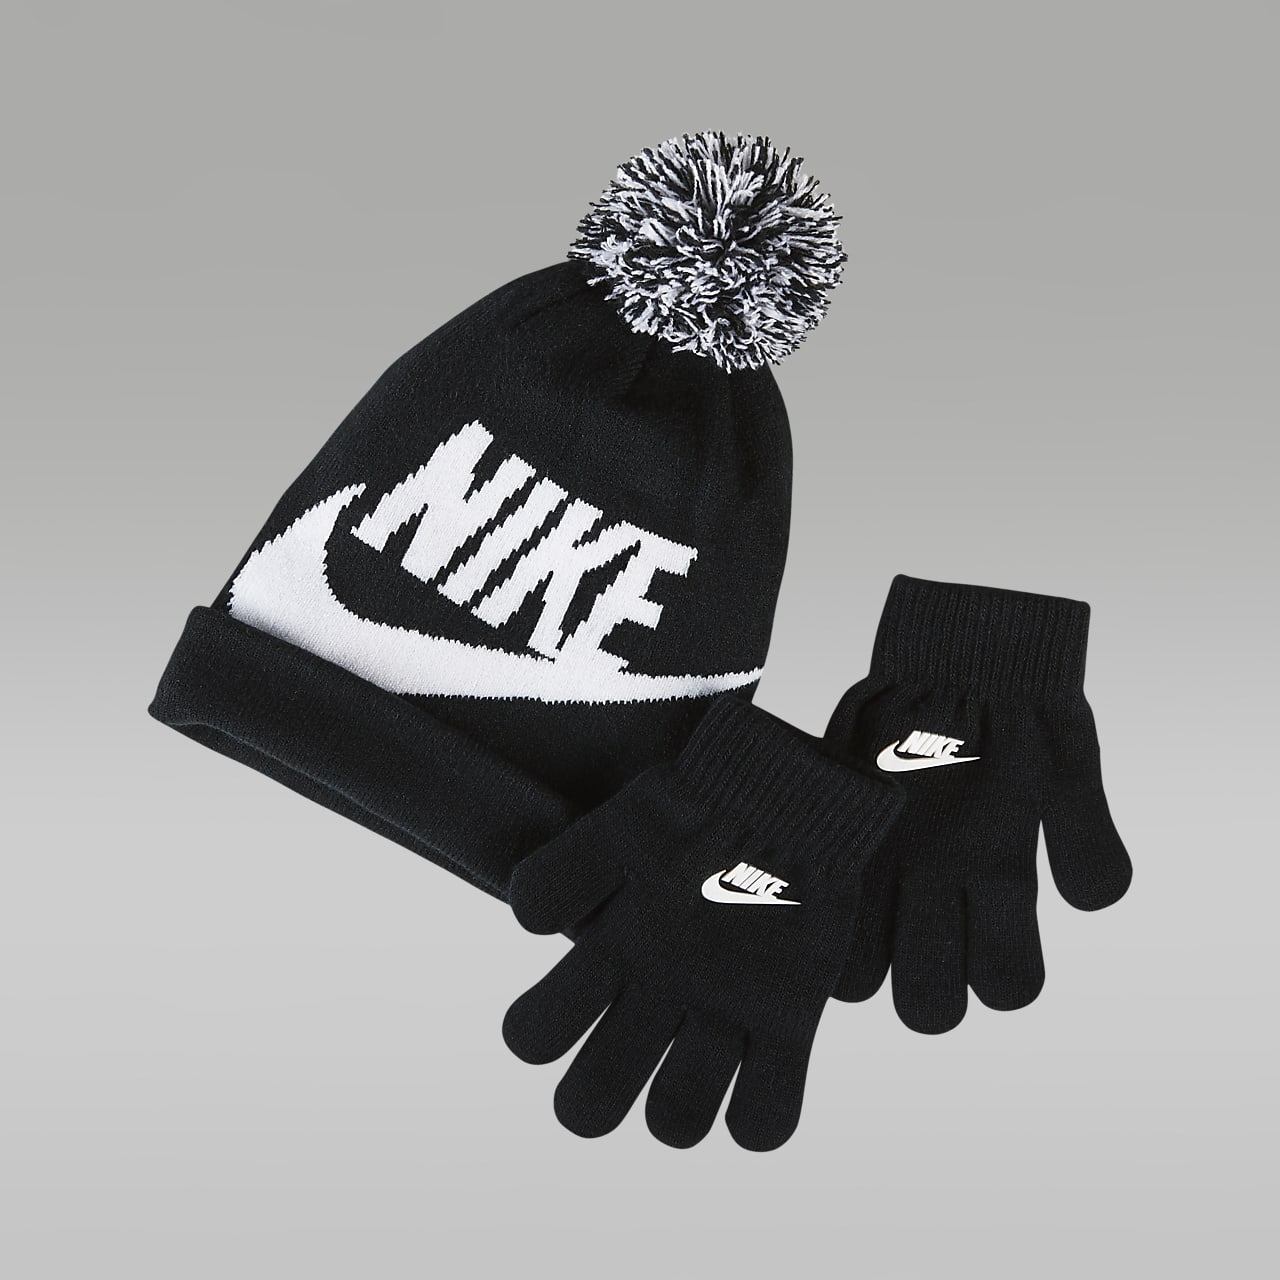 Nike Younger Kids' Beanie and Gloves Set